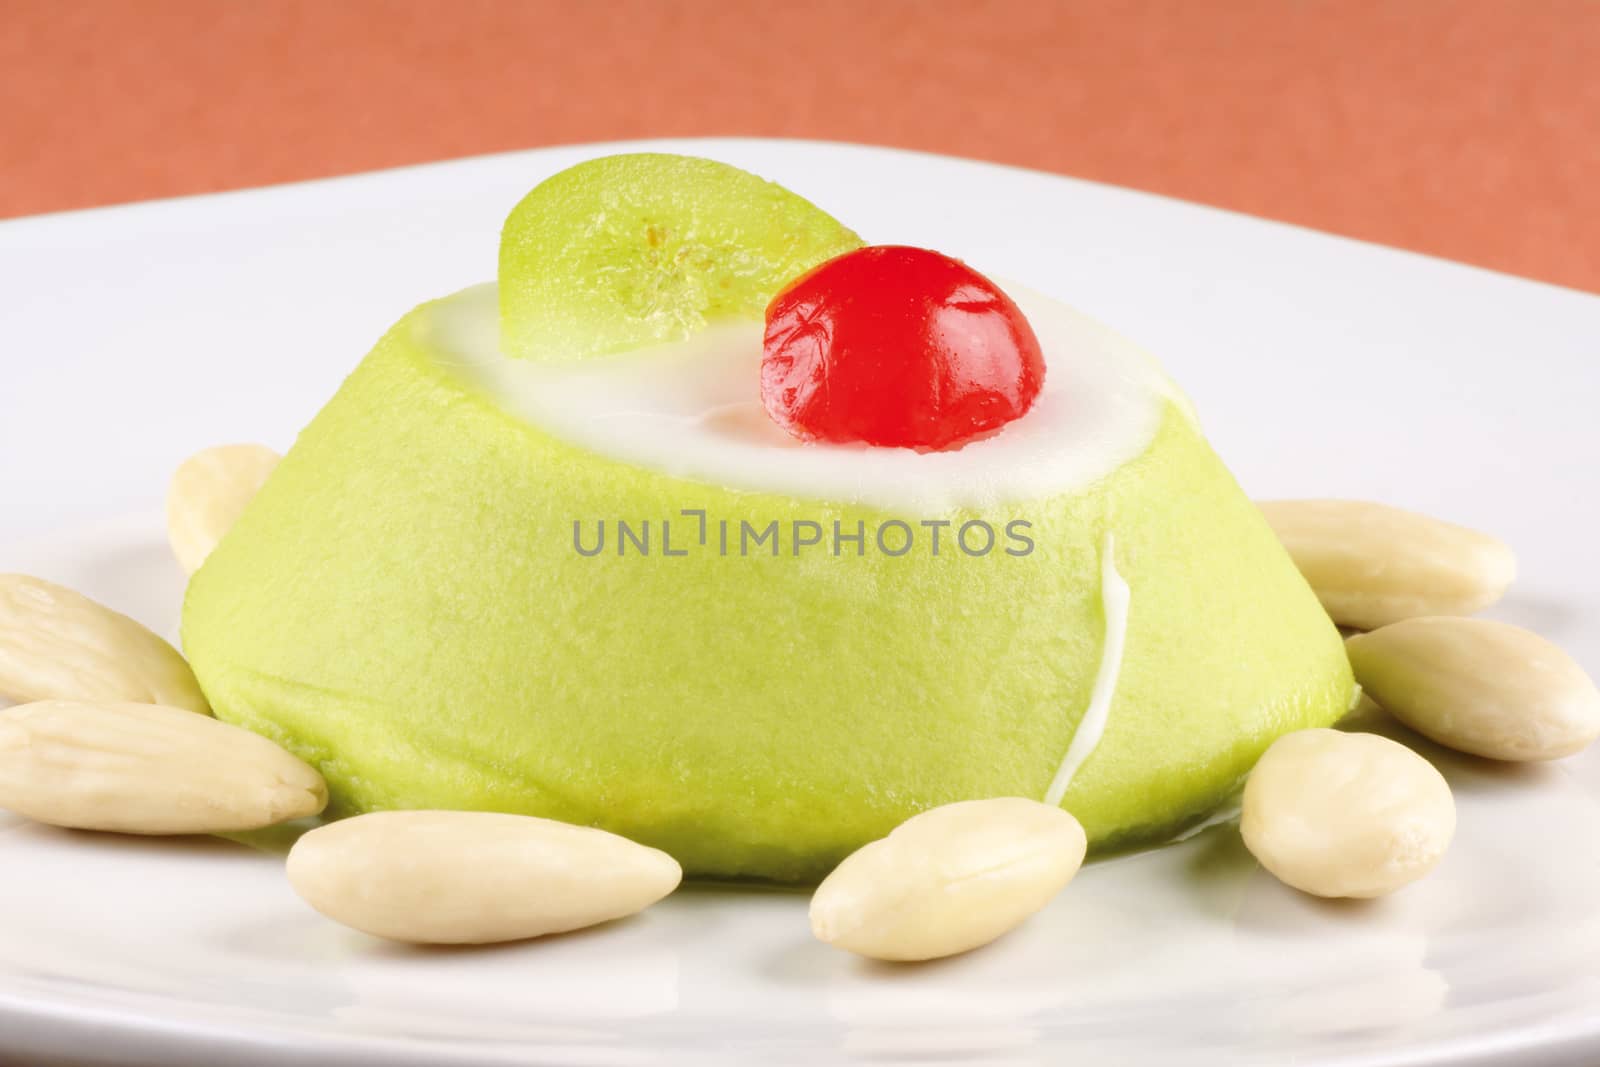 Miniature of a sicilian cassata with almonds on a white plate